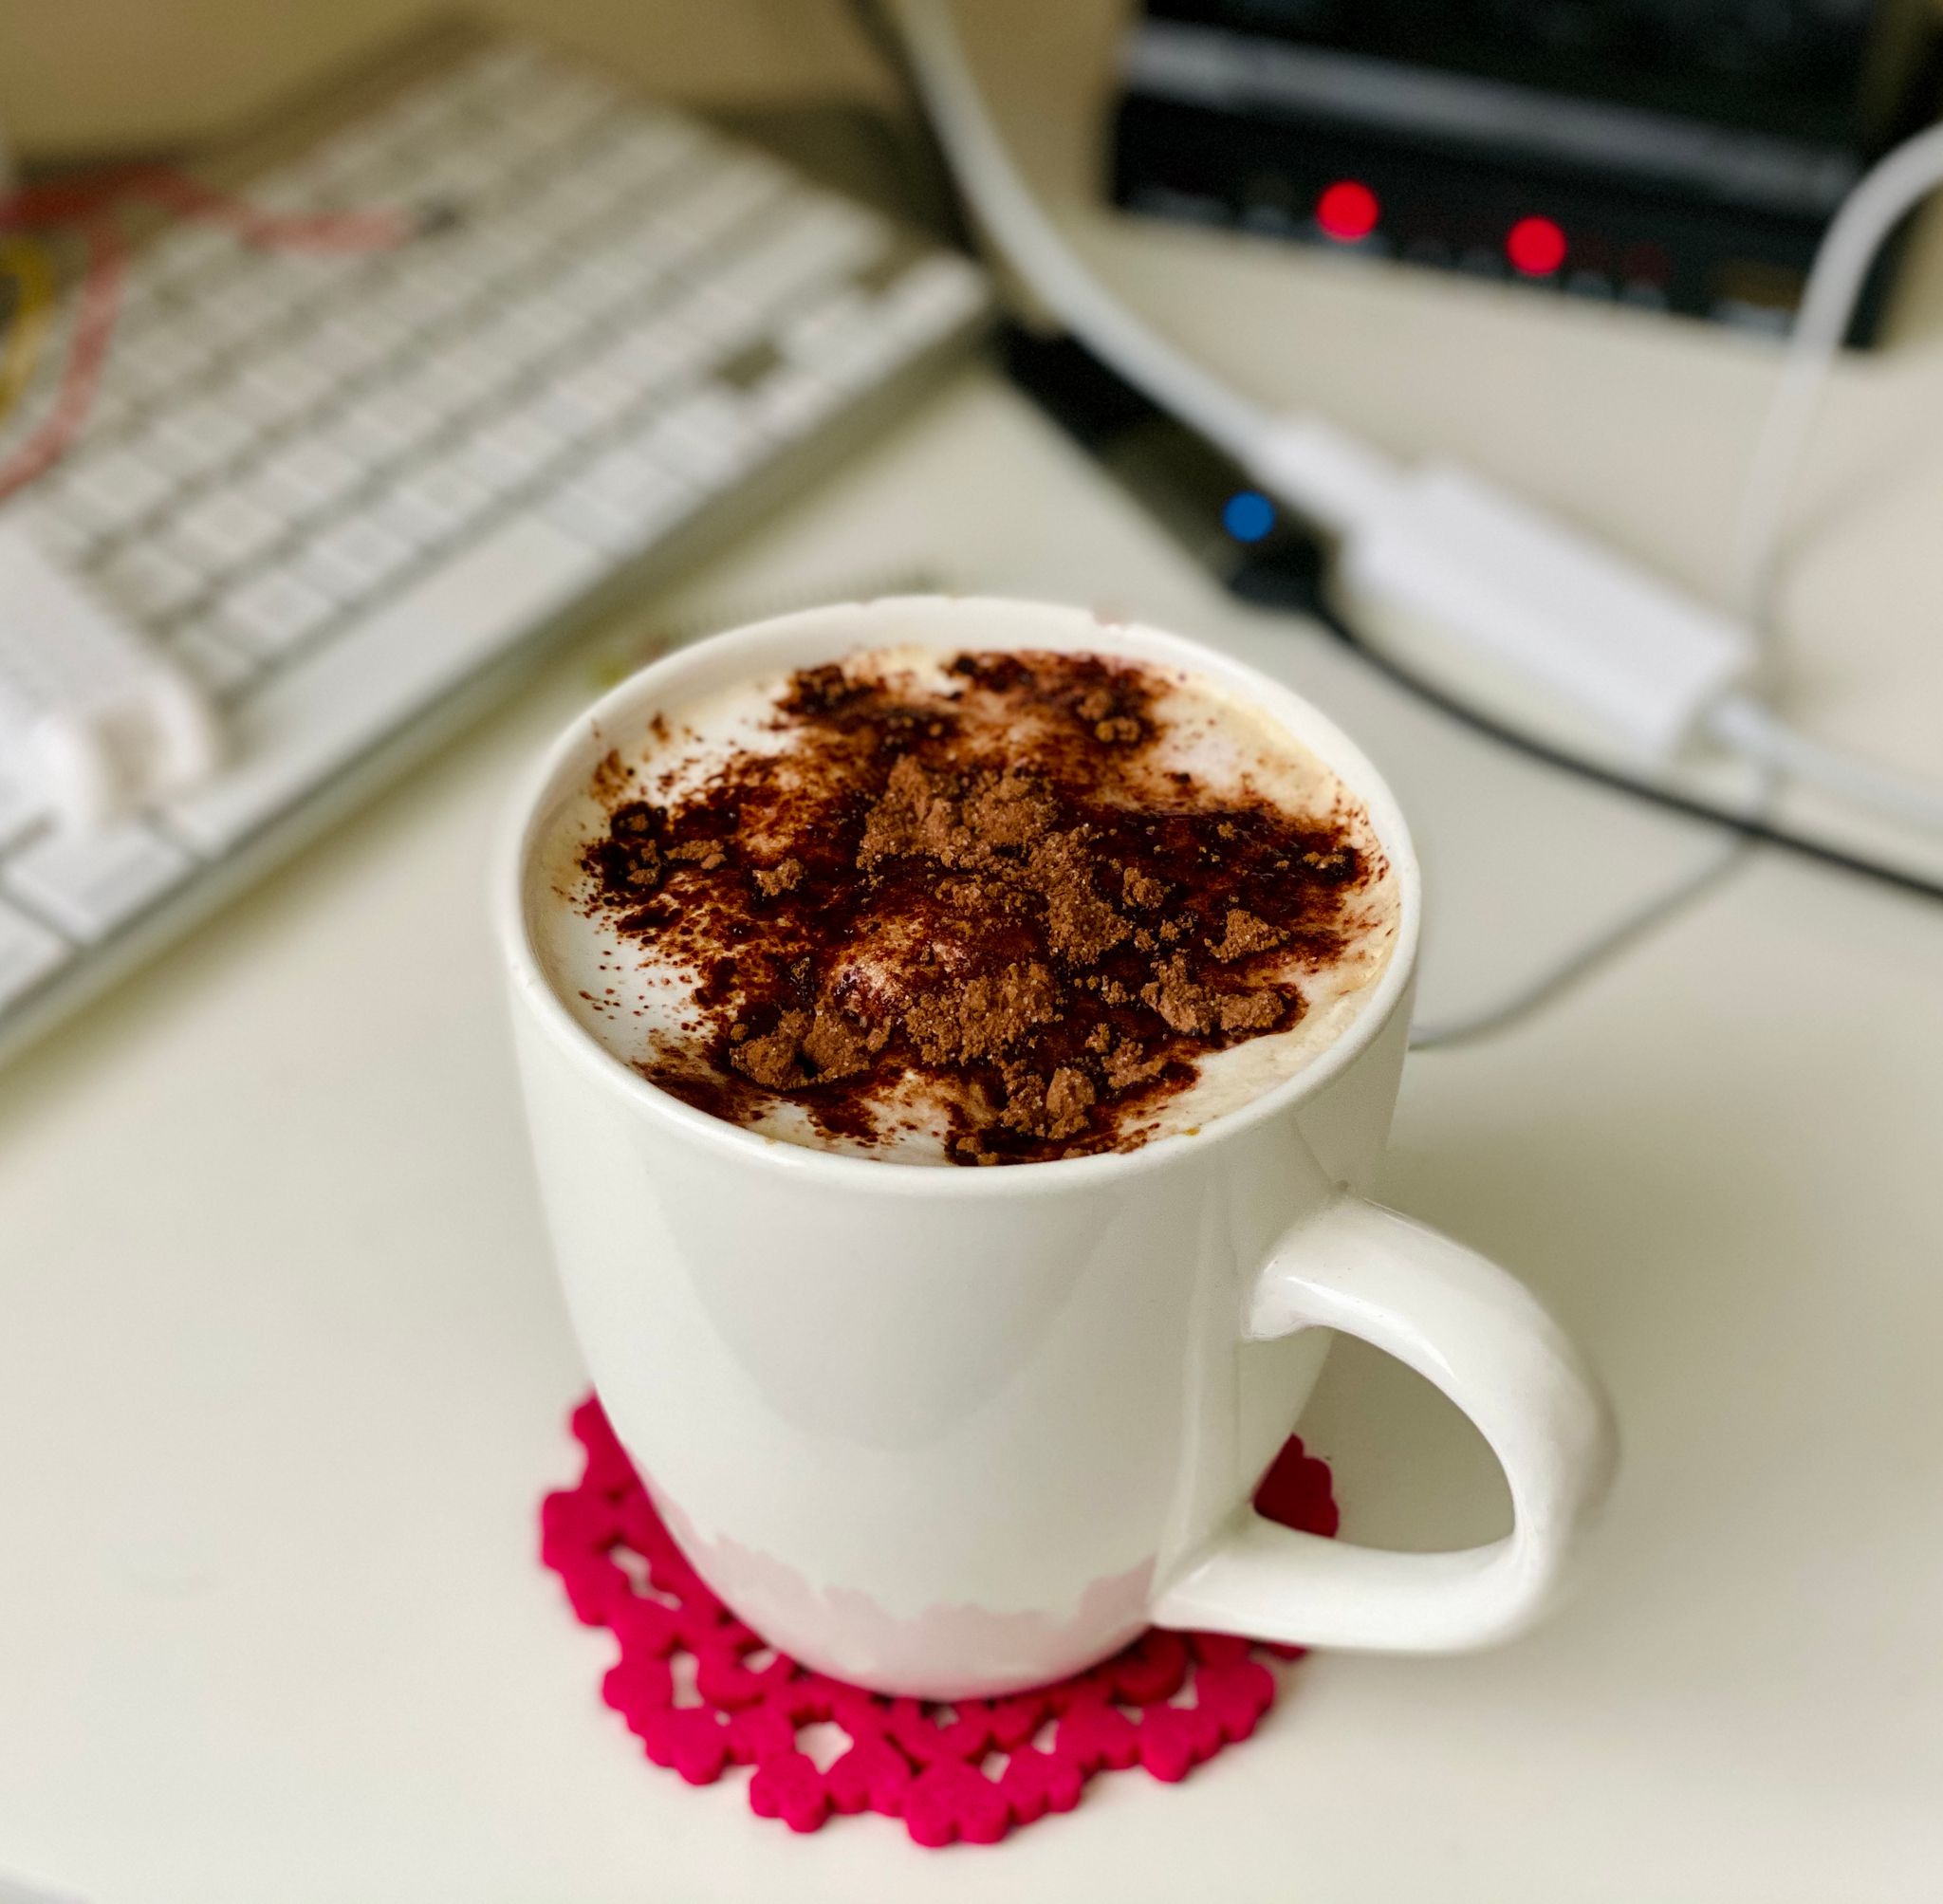 A photo of a mug of coffee, ostensibly a flat white but it has dark chocolate hot chocolate mix sprinkled on top of the milk foam.